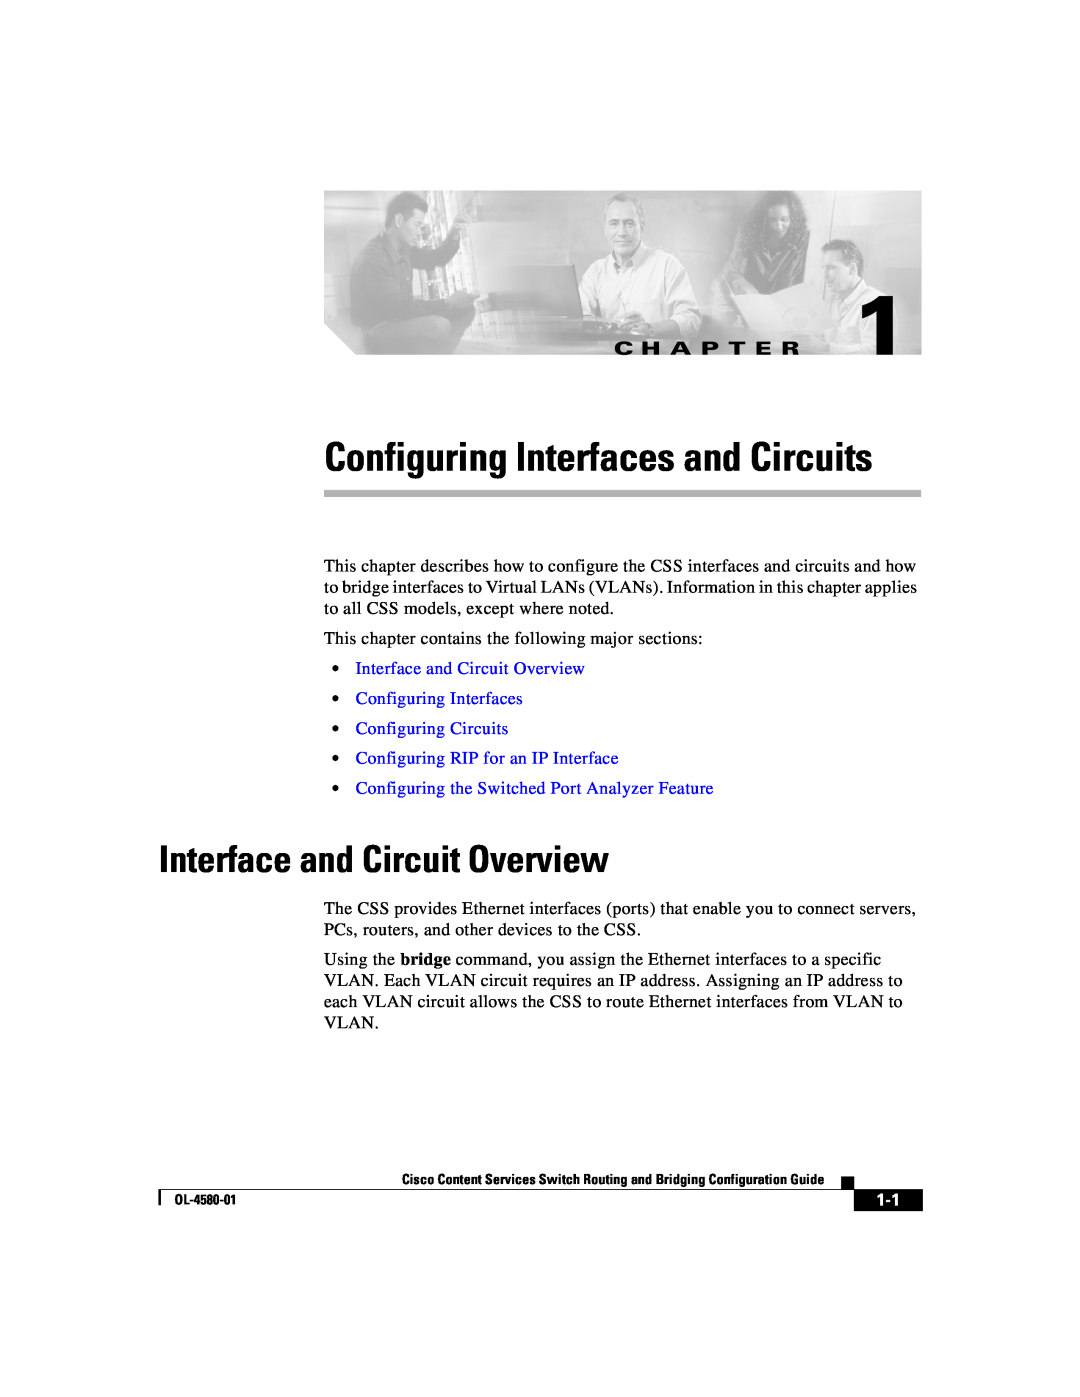 Cisco Systems OL-4580-01 manual Interface and Circuit Overview, Configuring Interfaces and Circuits, C H A P T E R 